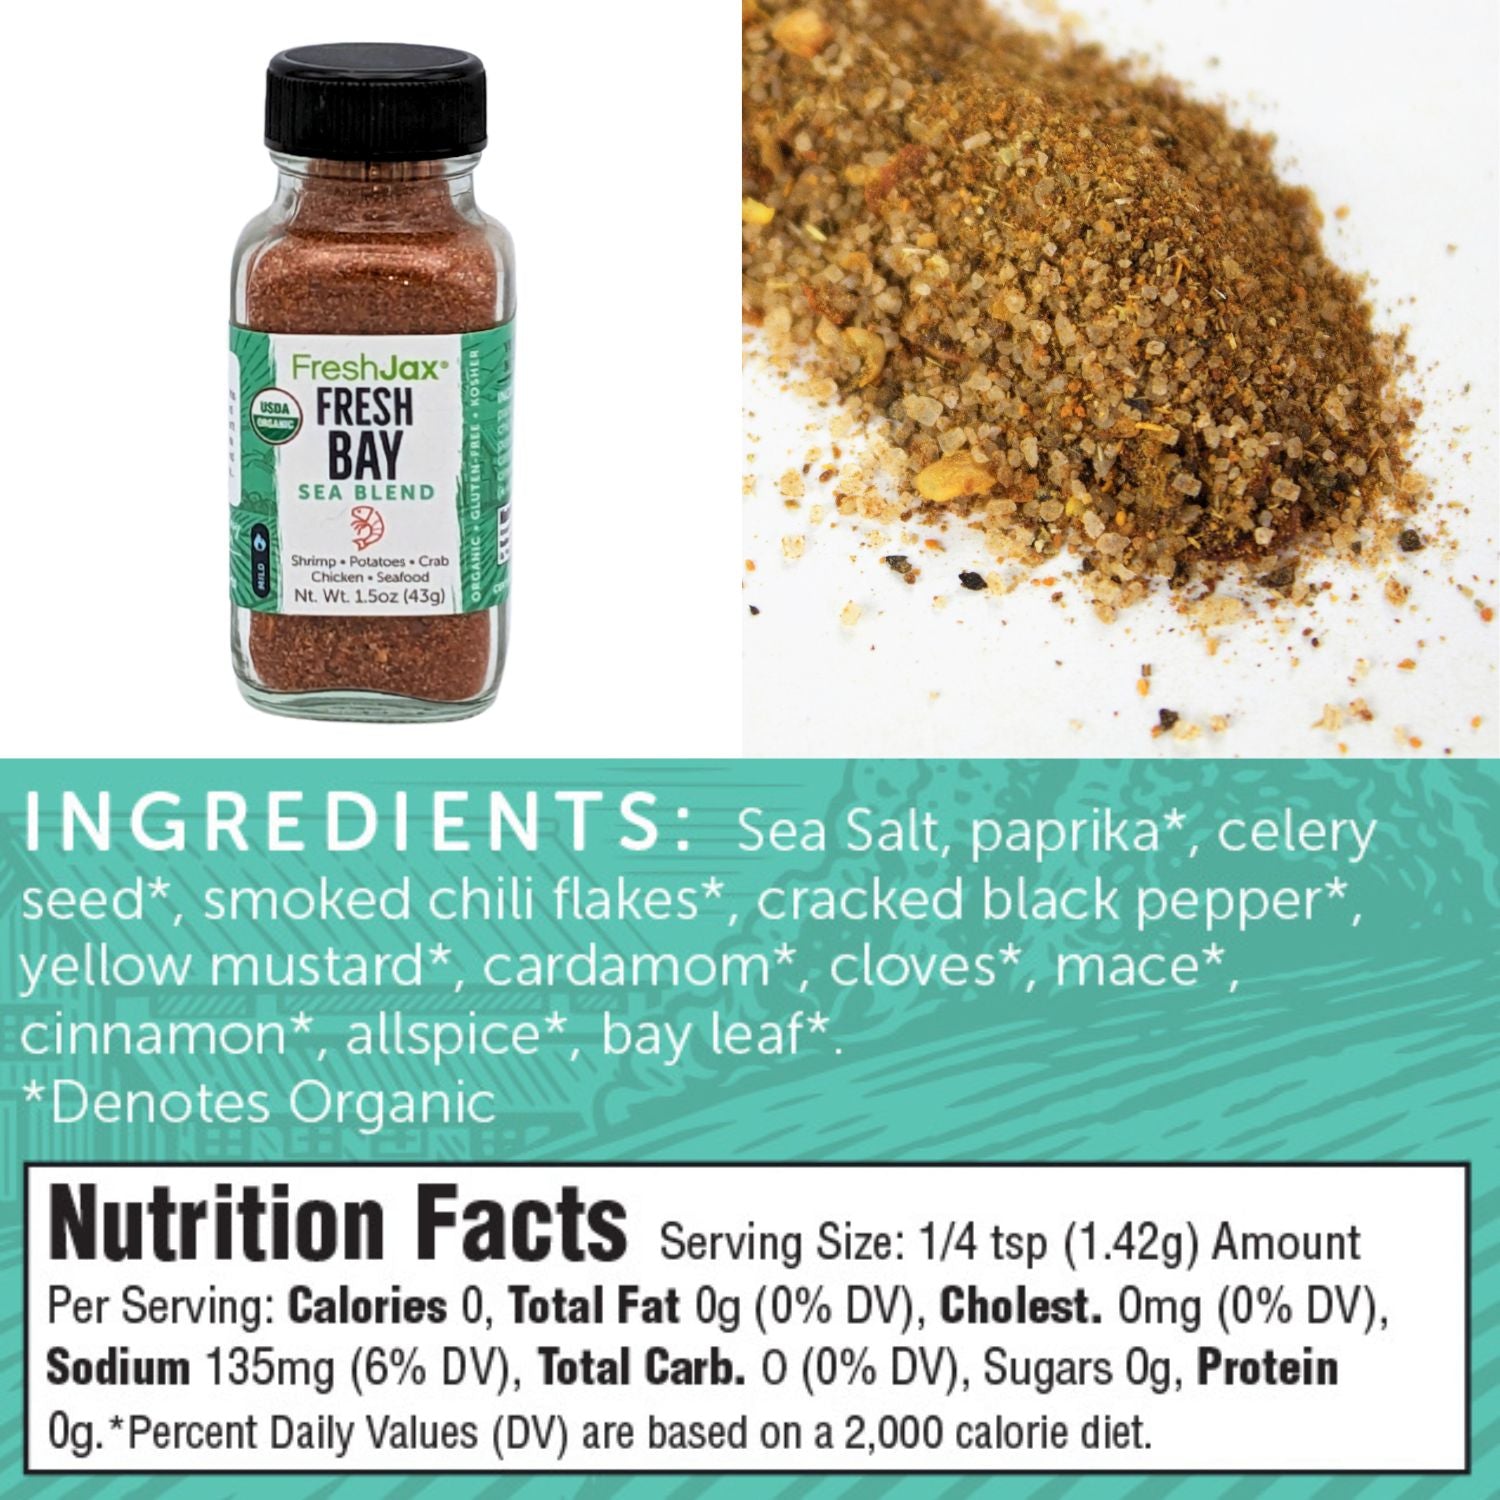 FreshJax Organic Spices Fresh Bay Ingredients and Nutritional Information